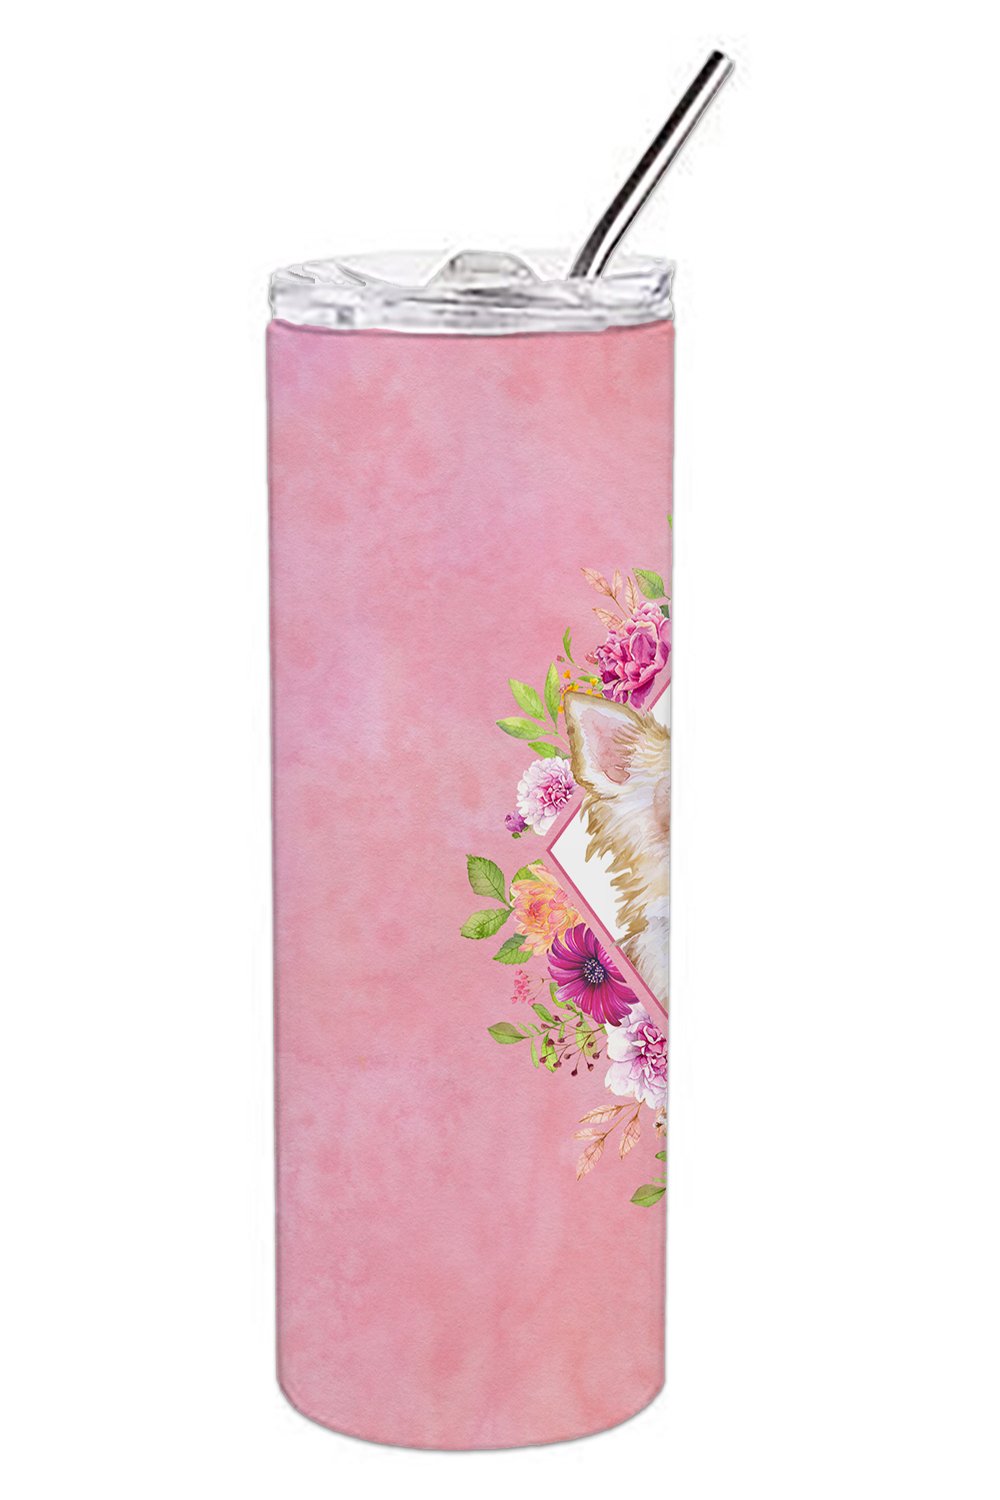 Long Hair Chihuahua Pink Flowers Double Walled Stainless Steel 20 oz Skinny Tumbler CK4127TBL20 by Caroline's Treasures